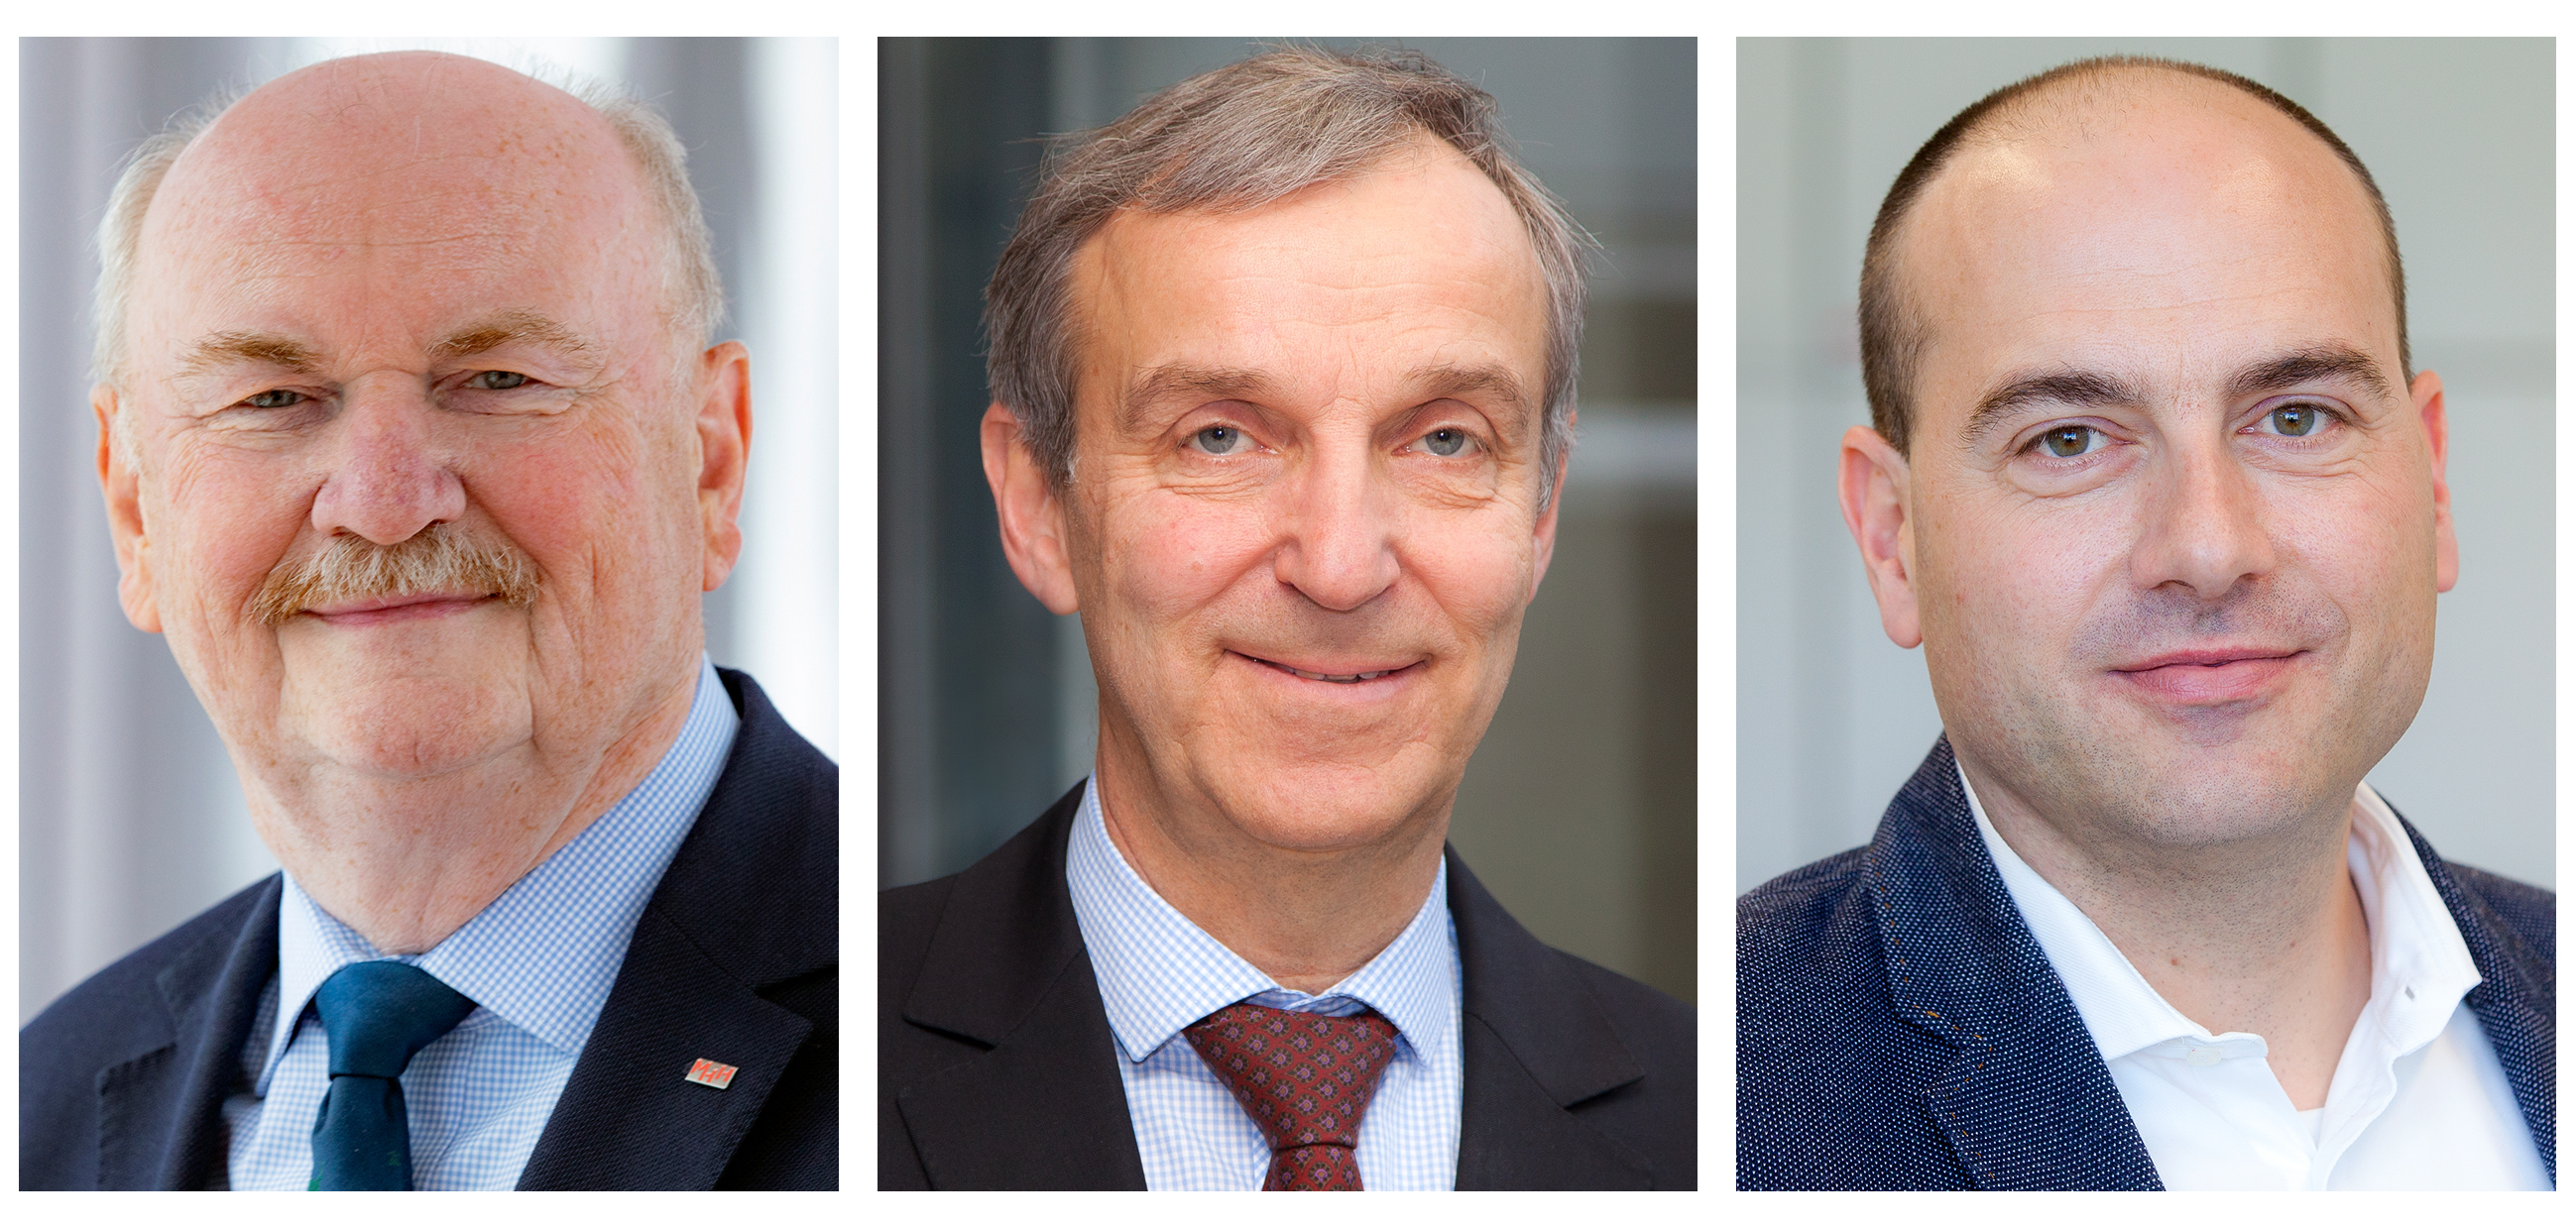  Portrait pictures of the MHH professors Manns, Werfel and Thum.